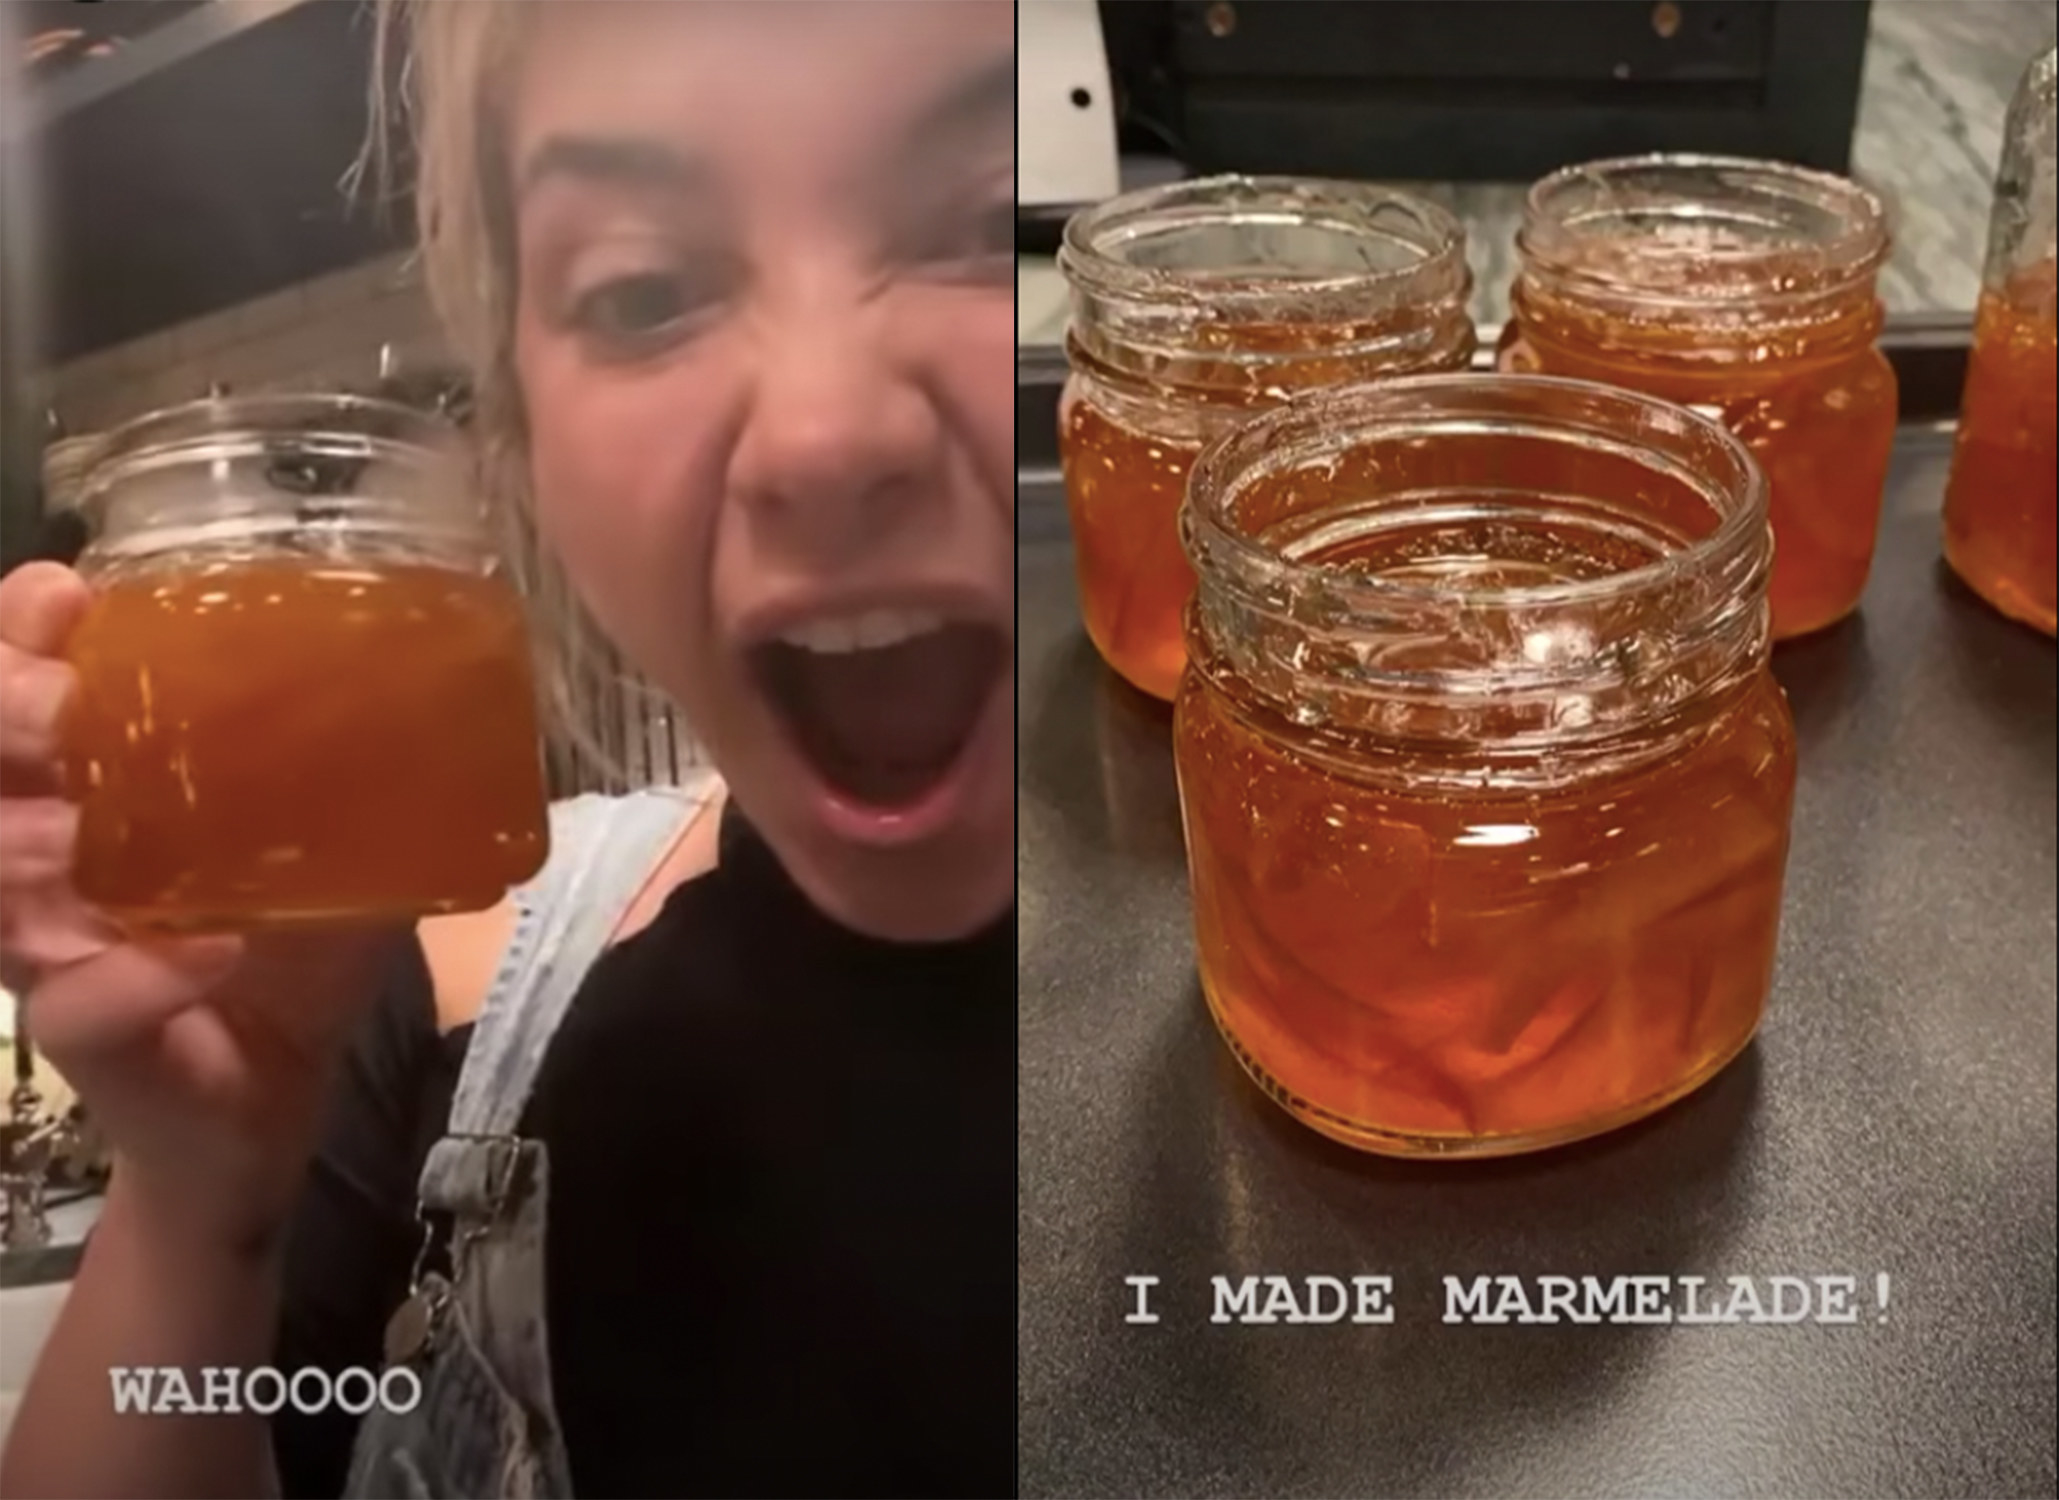 Flo shows off the many little jars she filled with marmalade